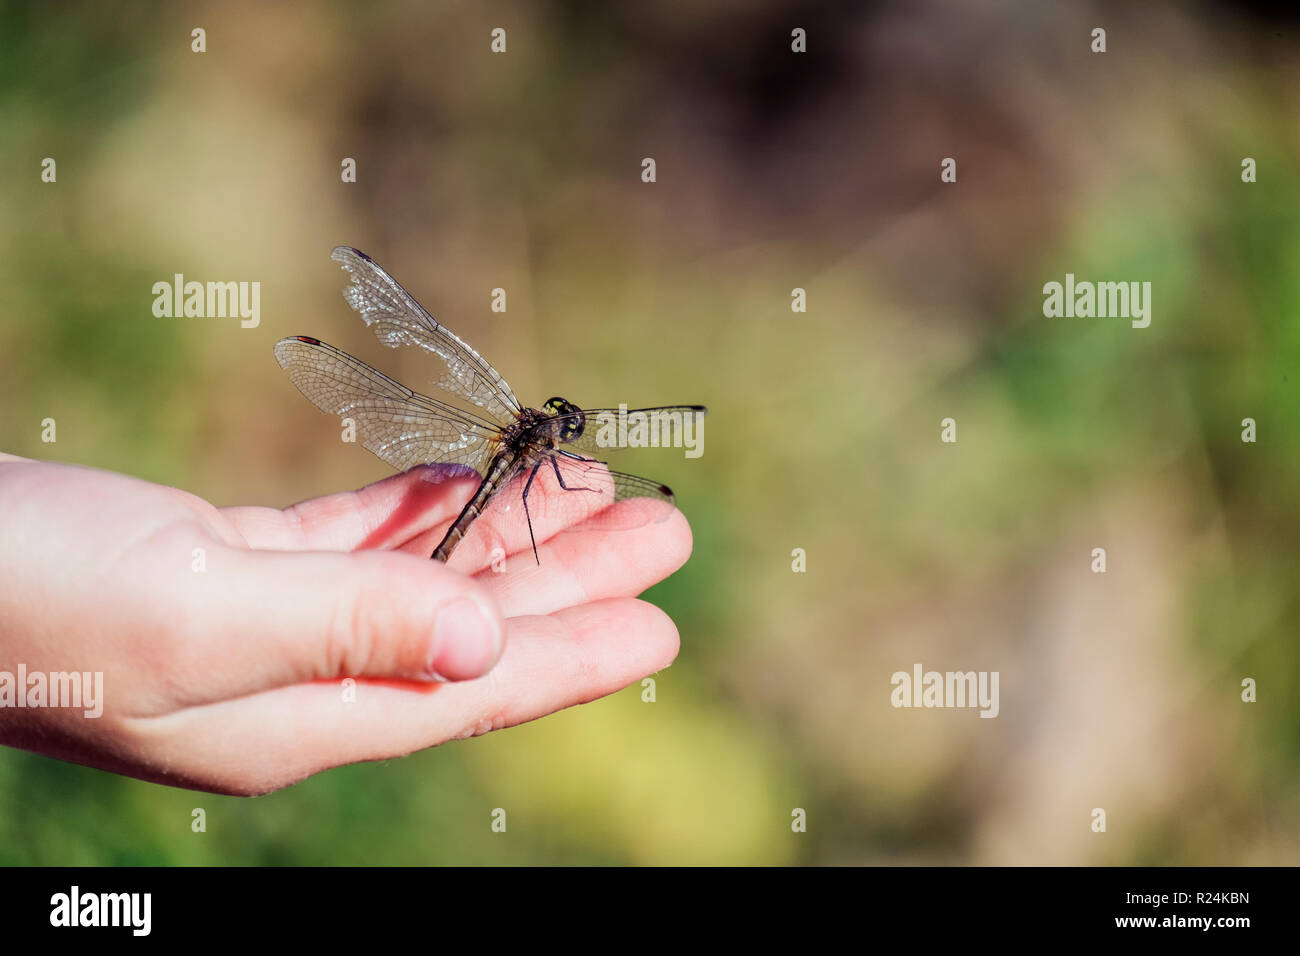 Large dragonfly with torn wing sits on the child's palm Stock Photo